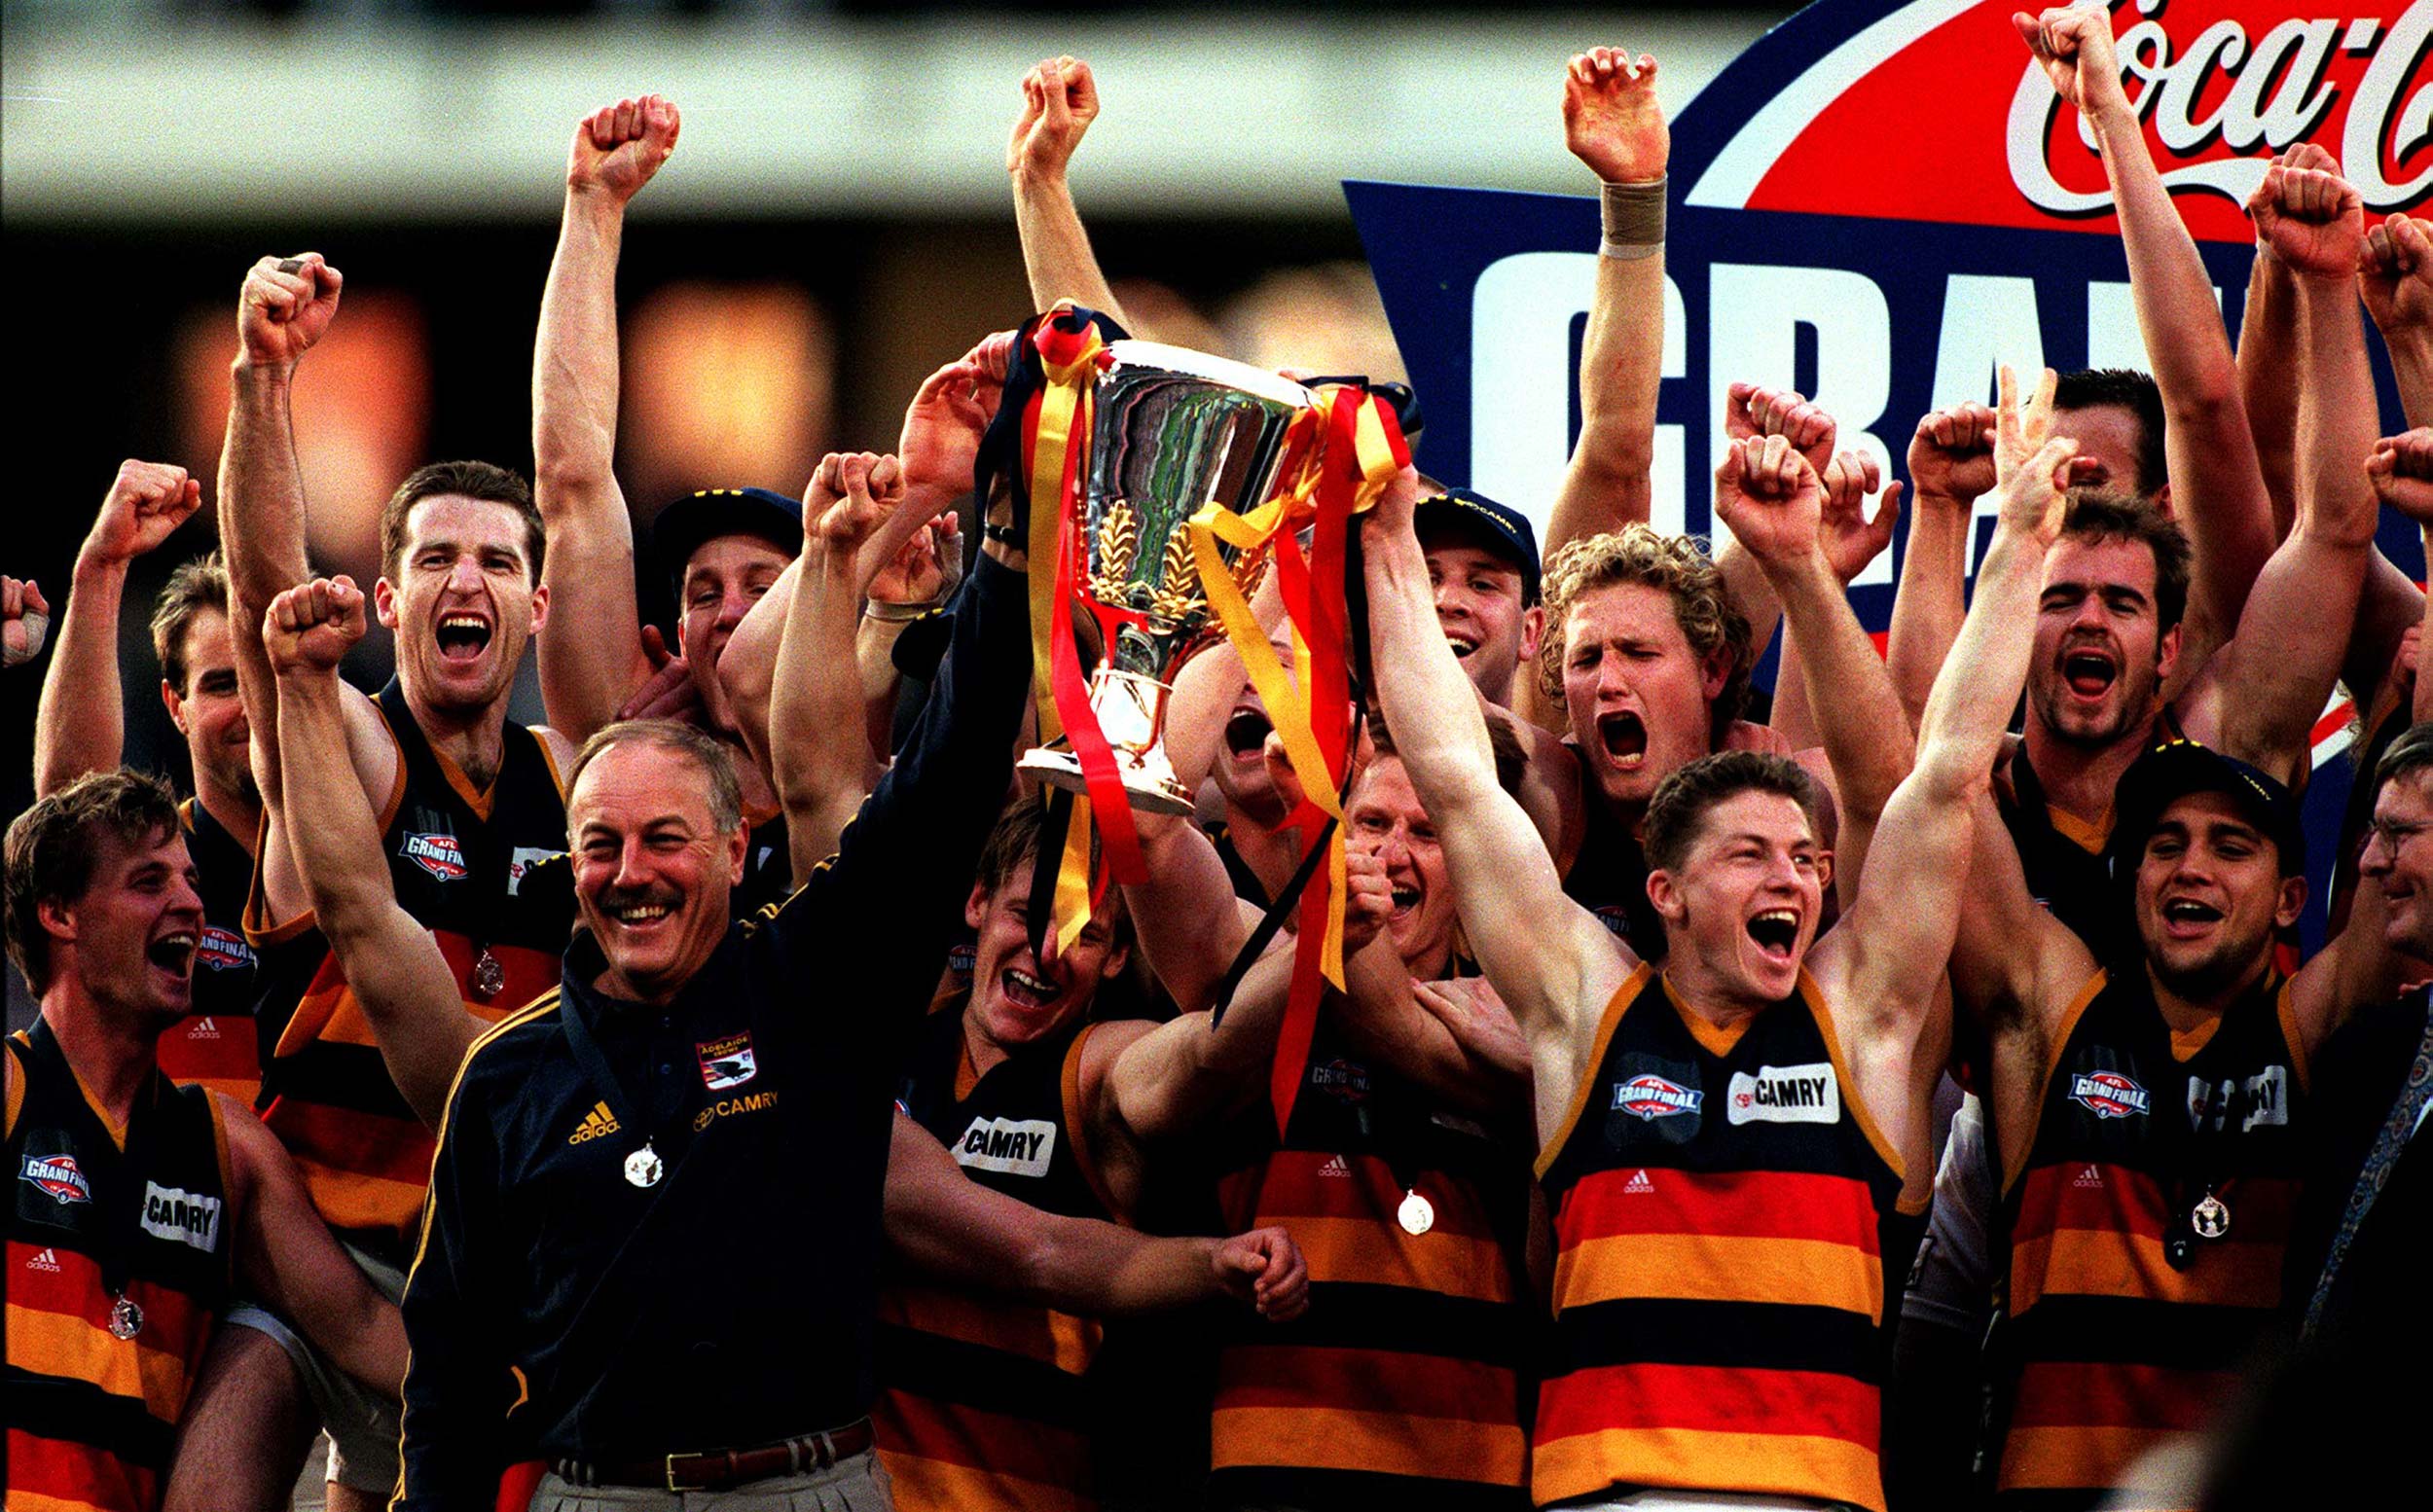   Adelaide Crows coach Malcolm Blight (L) & skipper Mark Bickley hold Premiership Cup aloft at MCG following defeat of North Melbourne in AFL grand final, 26/09/98.
Australian Rules / Trophy
  